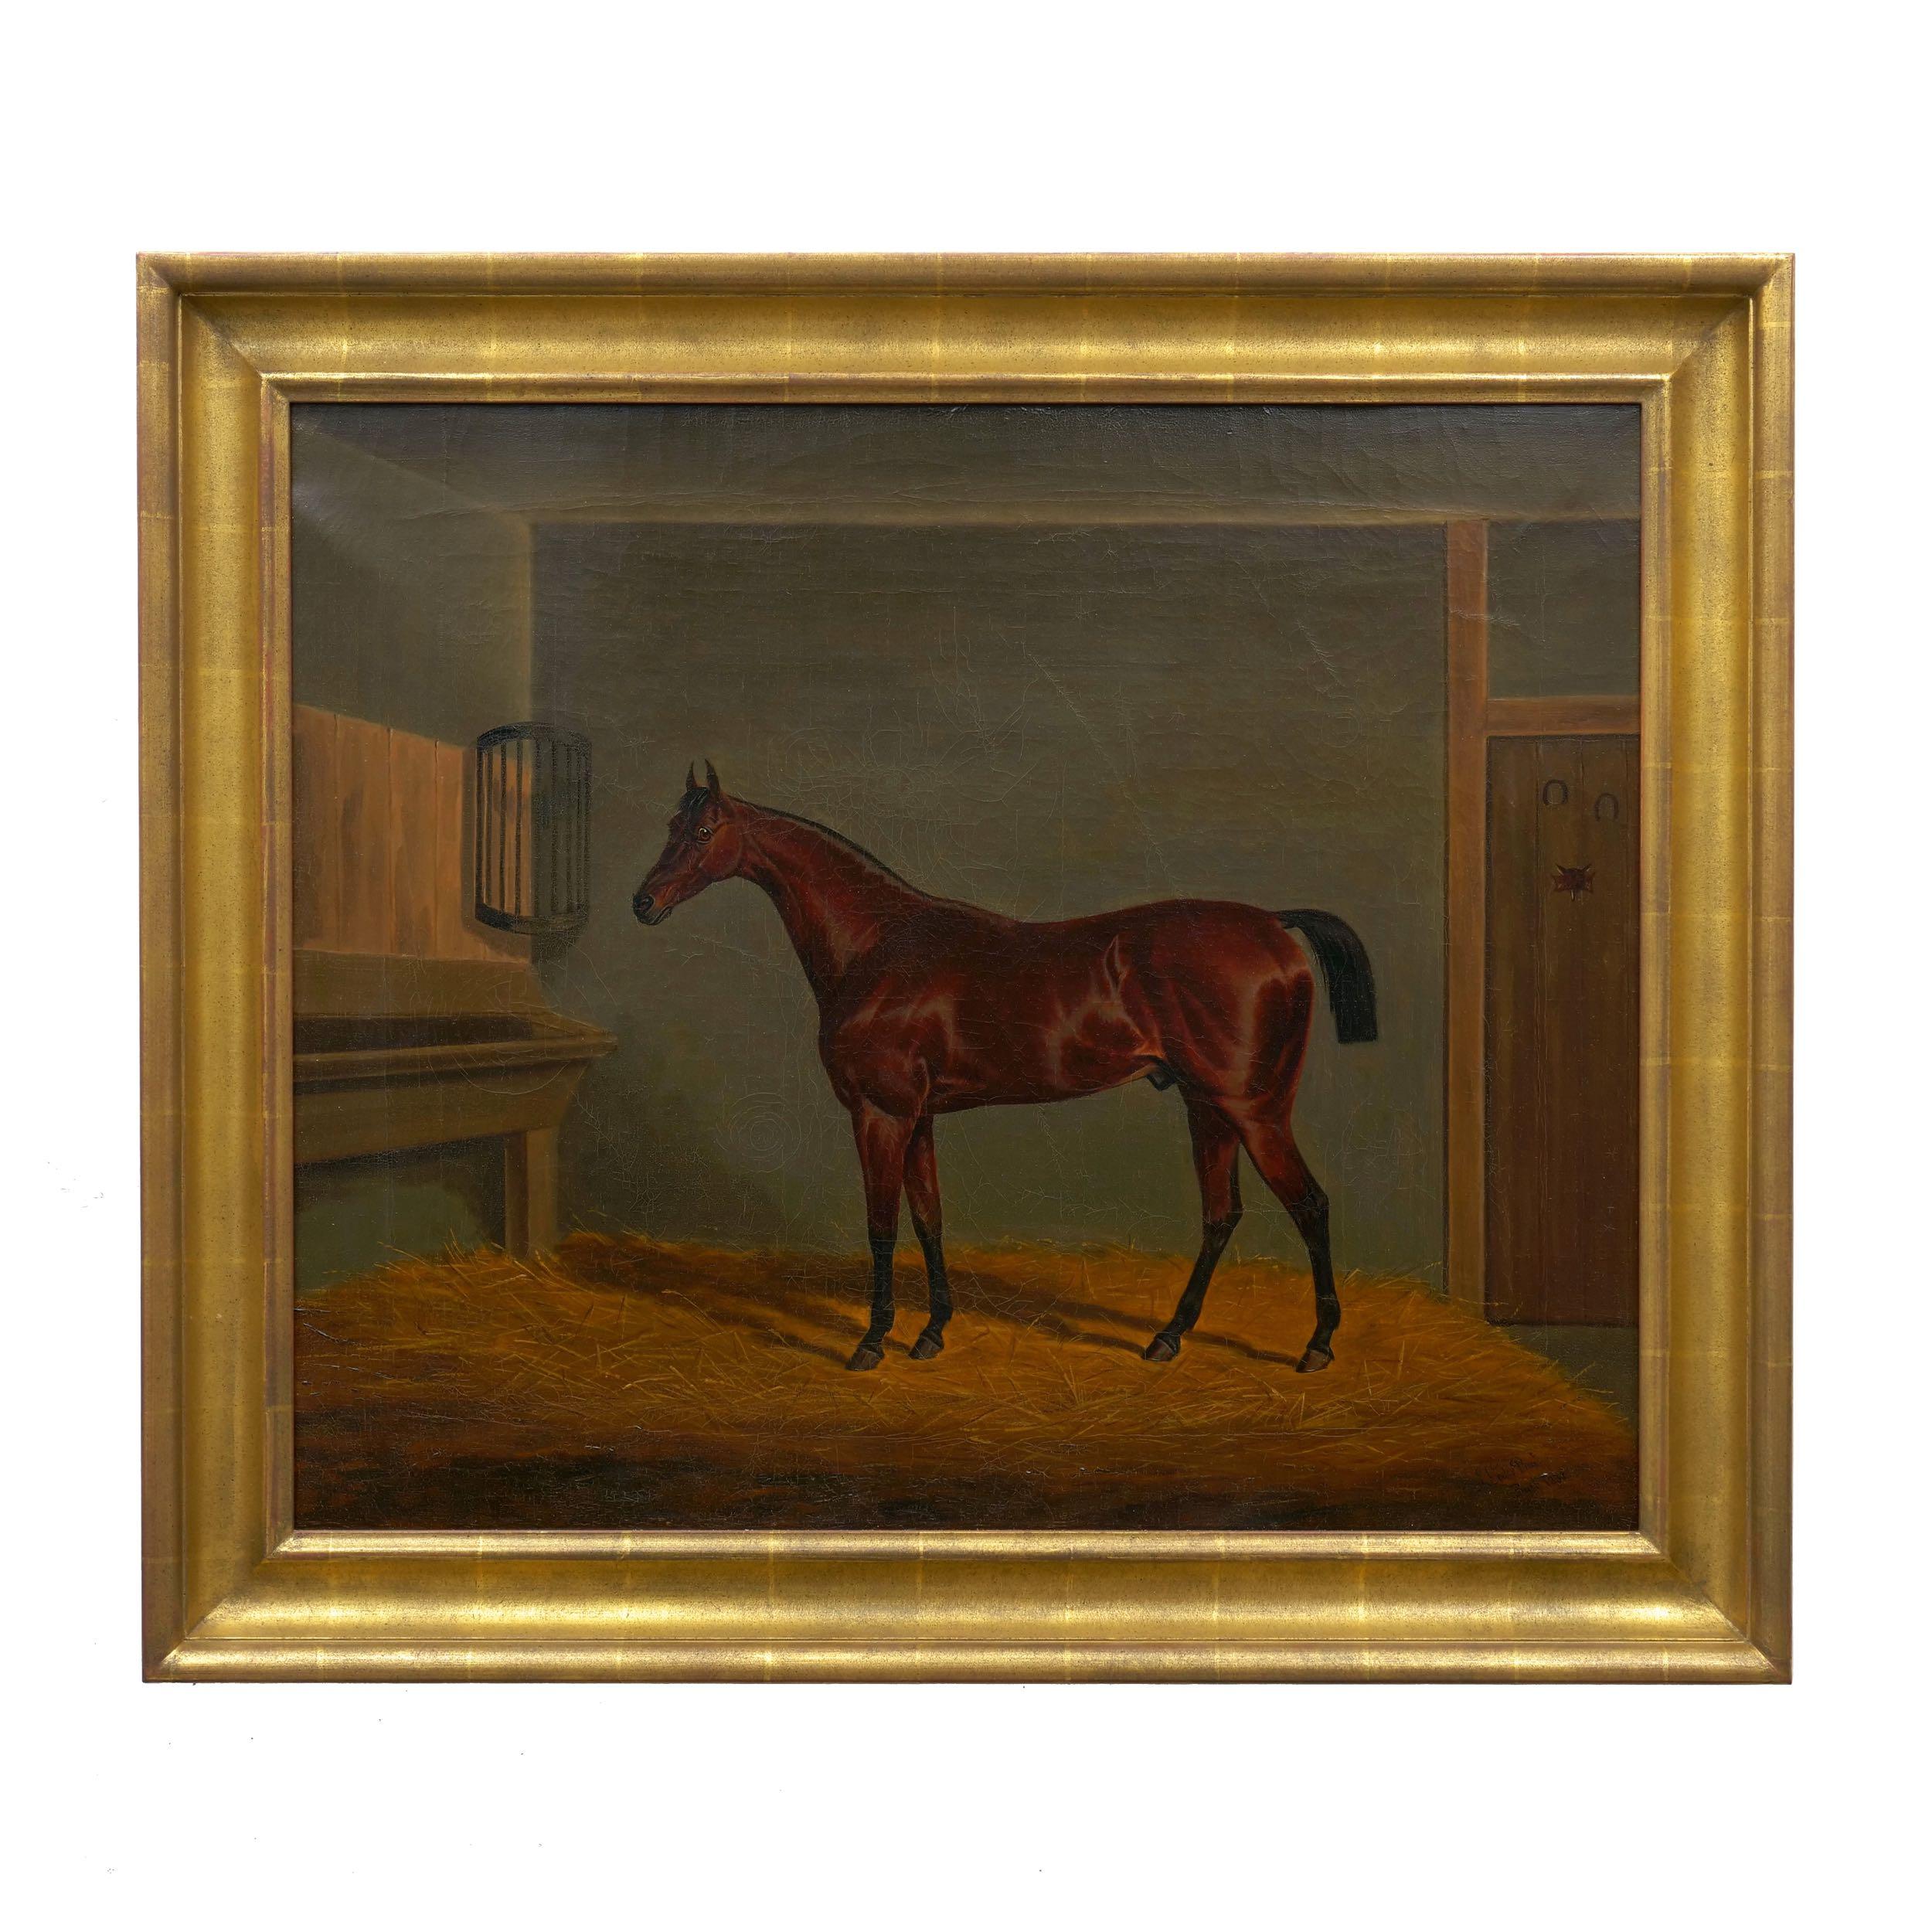 A fine equestrian scene of a handsome brown racehorse depicted in a well-lit stabile interior, the lighting of the scene is particularly interesting with shadows cast behind the proud animal translucent against the golden hay before ghosting against